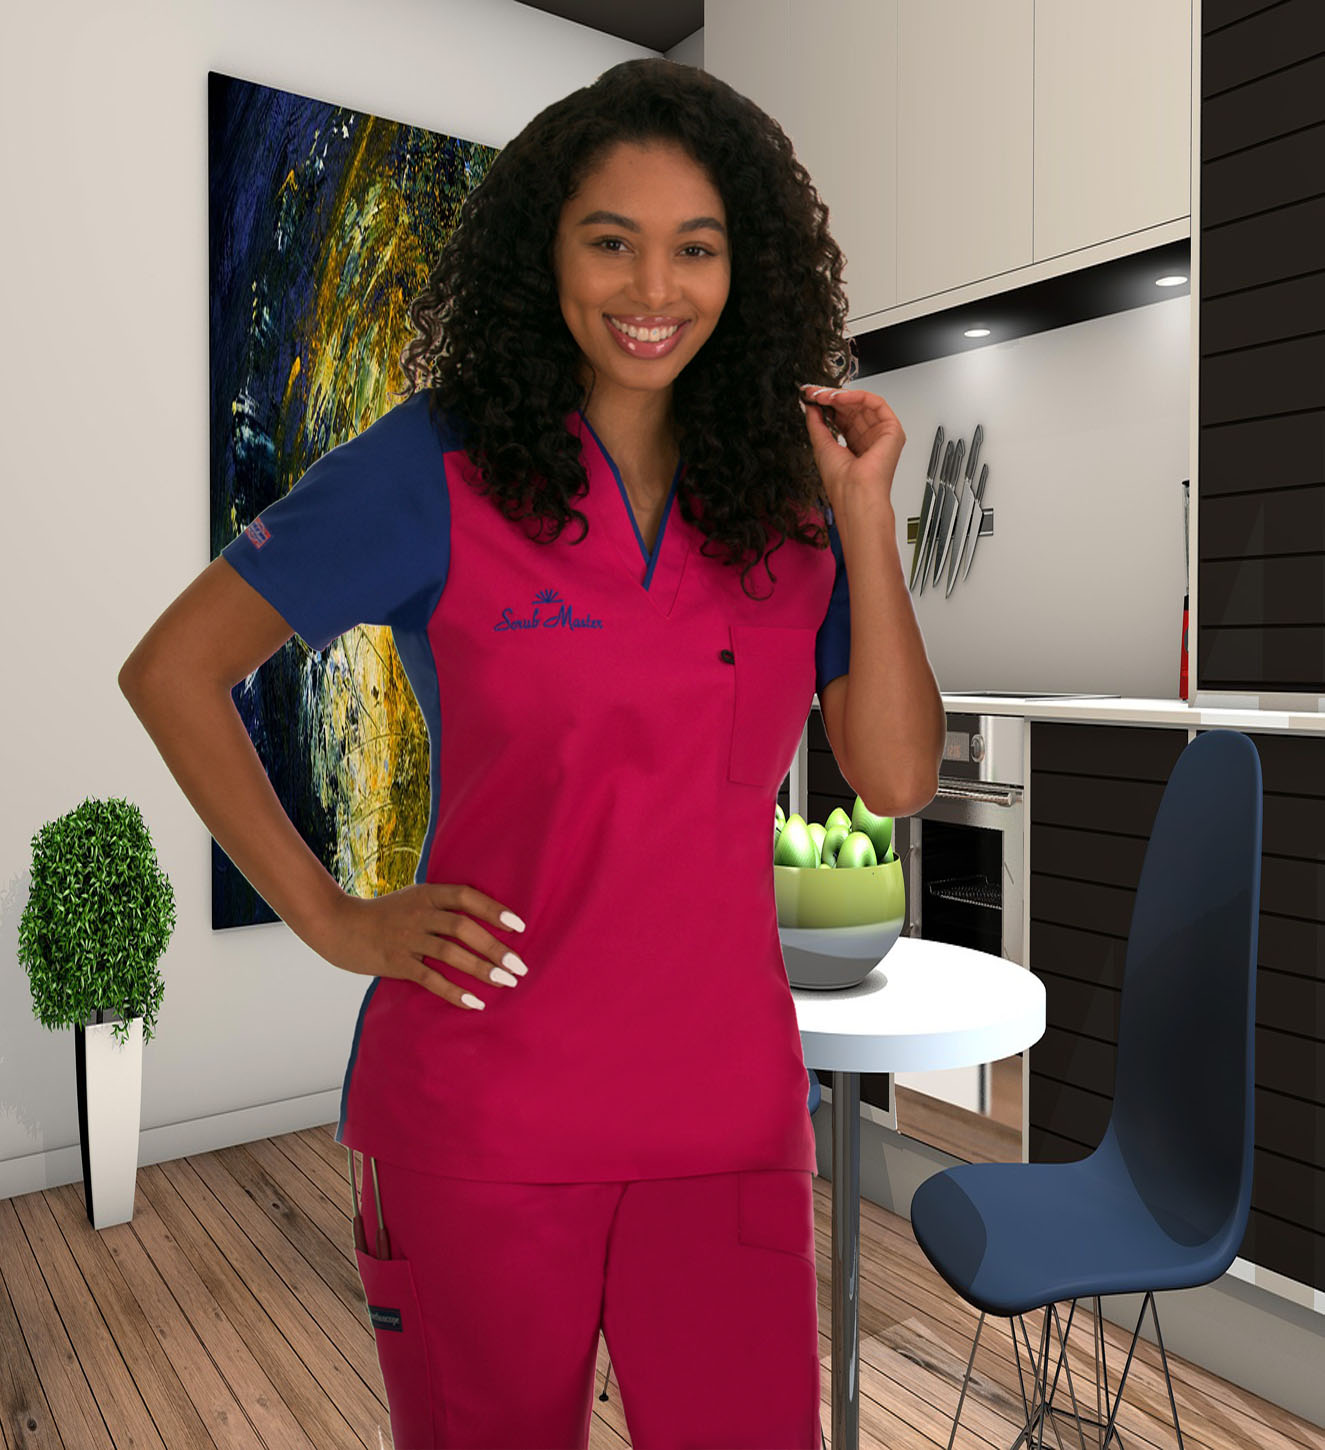 scrub uniform picture showing a a nurse wearing our breakthrough patented scrubs. The scrubmaster or scrub master is the place to go when searching online for men and women doctors clothing and designs. We are not the Scrum Master and we sell and deliver medical uniforms to hospitals and clinics all around the united states